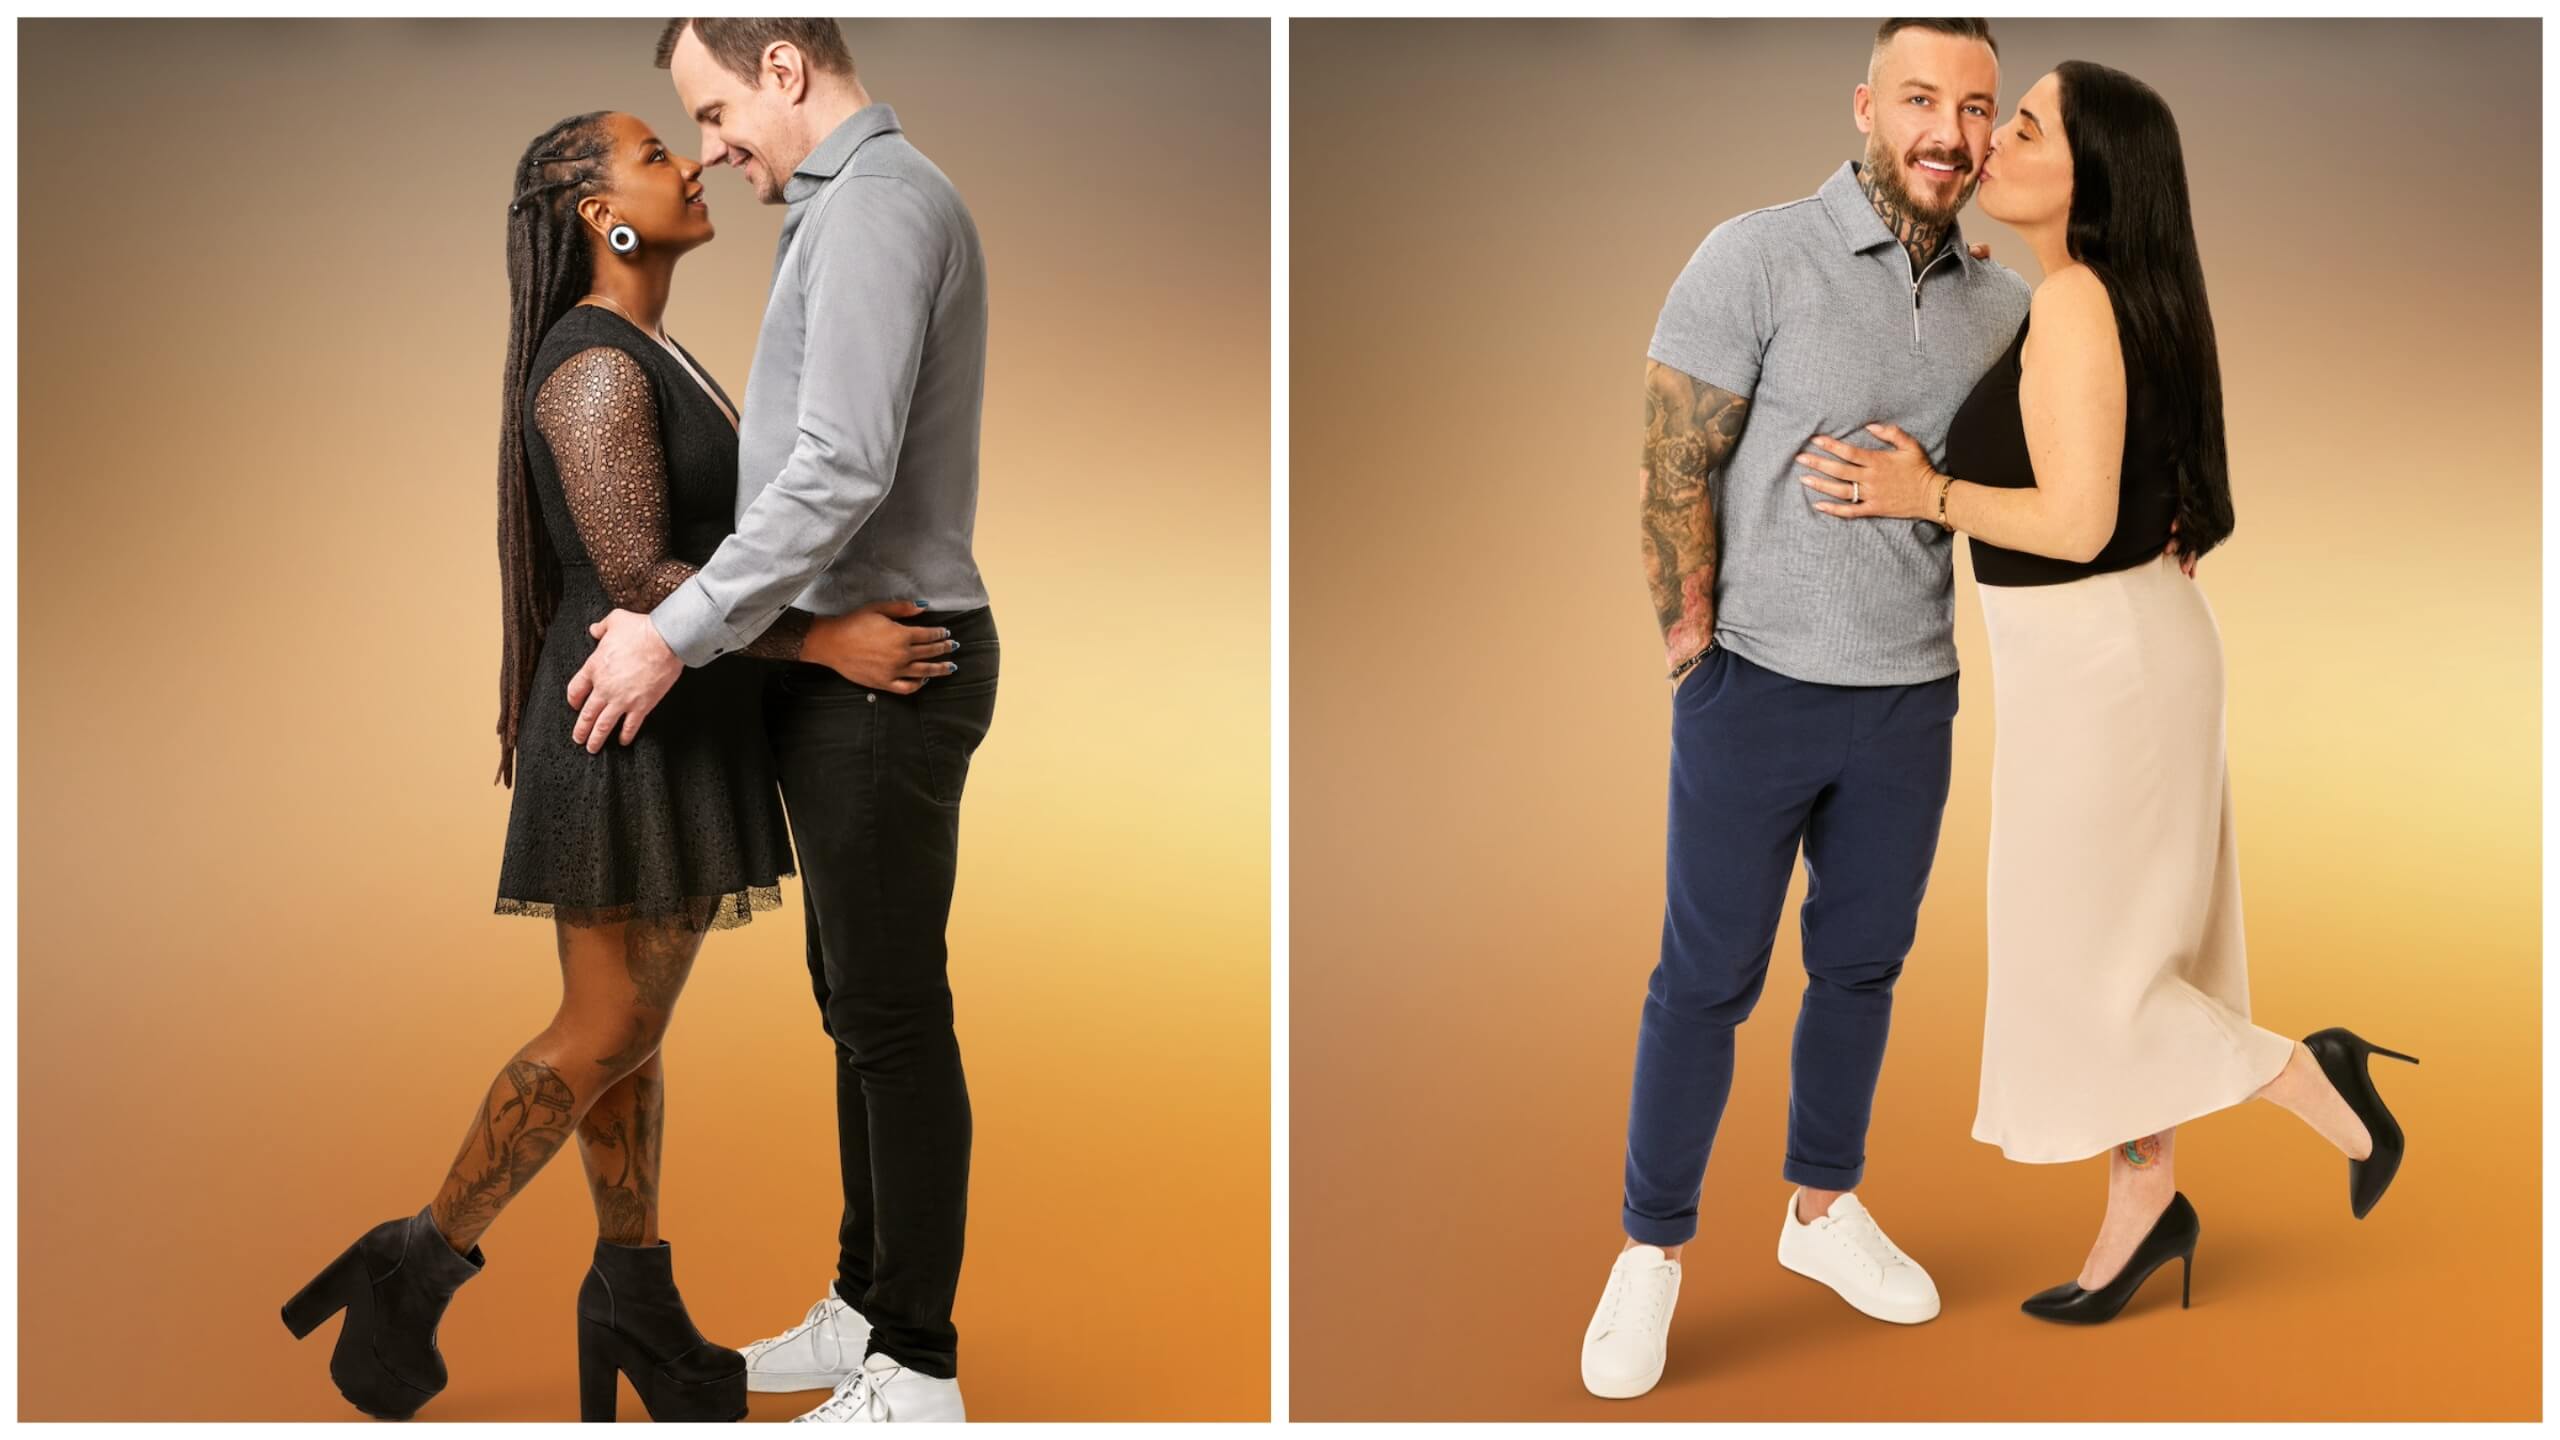 Side by side portraits of Corona and Ingi and Sean and Joanne from '90 Day Fiancé: The Other Way' Season 6